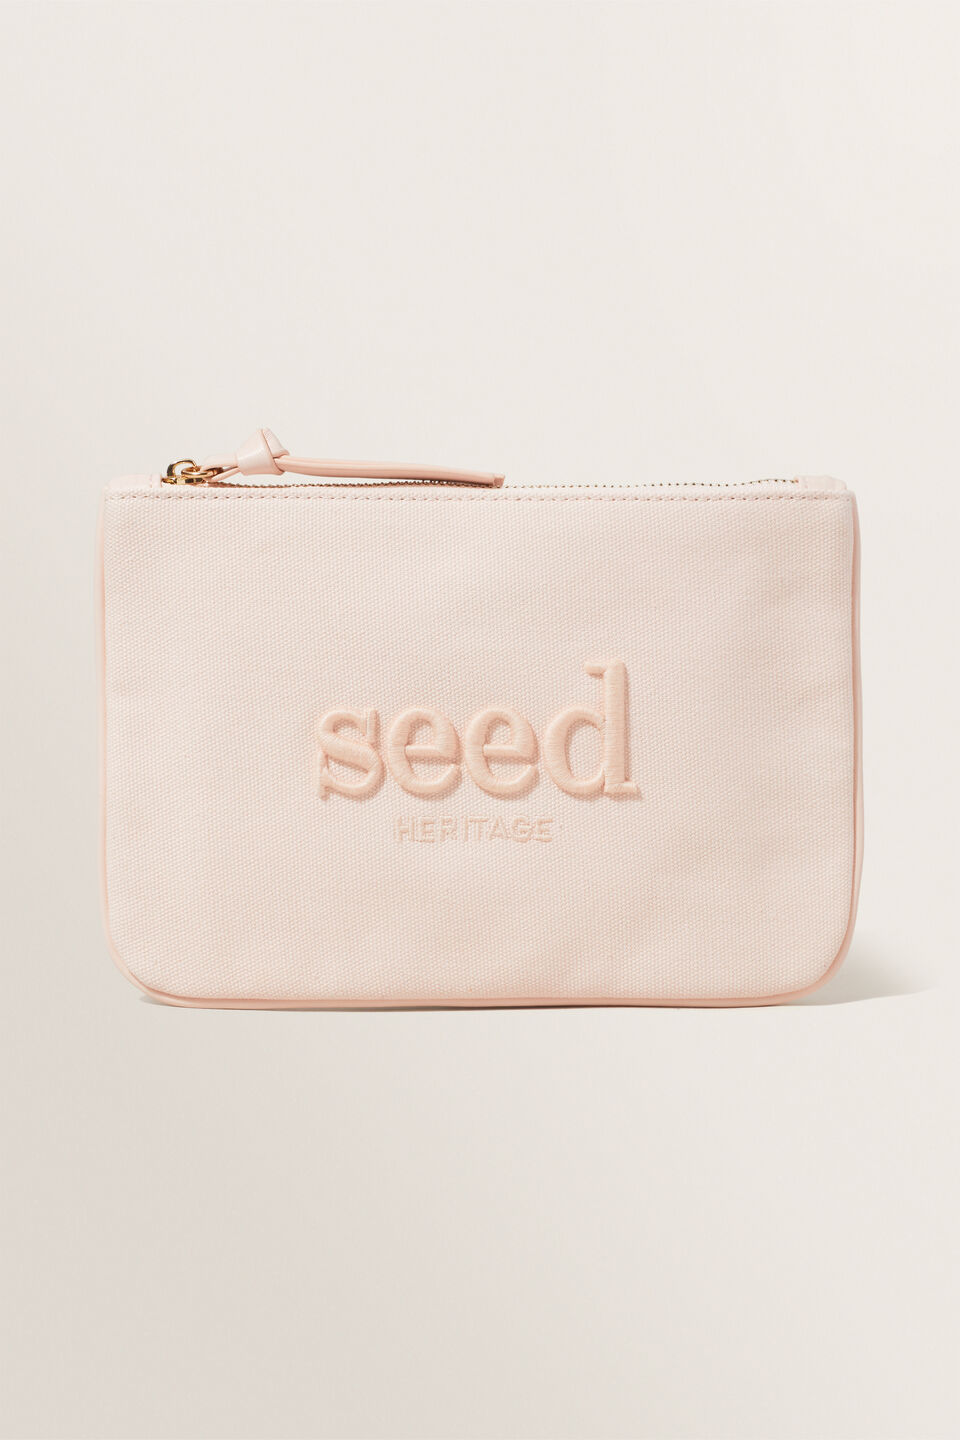 Seed Pouch  Pale Blossom